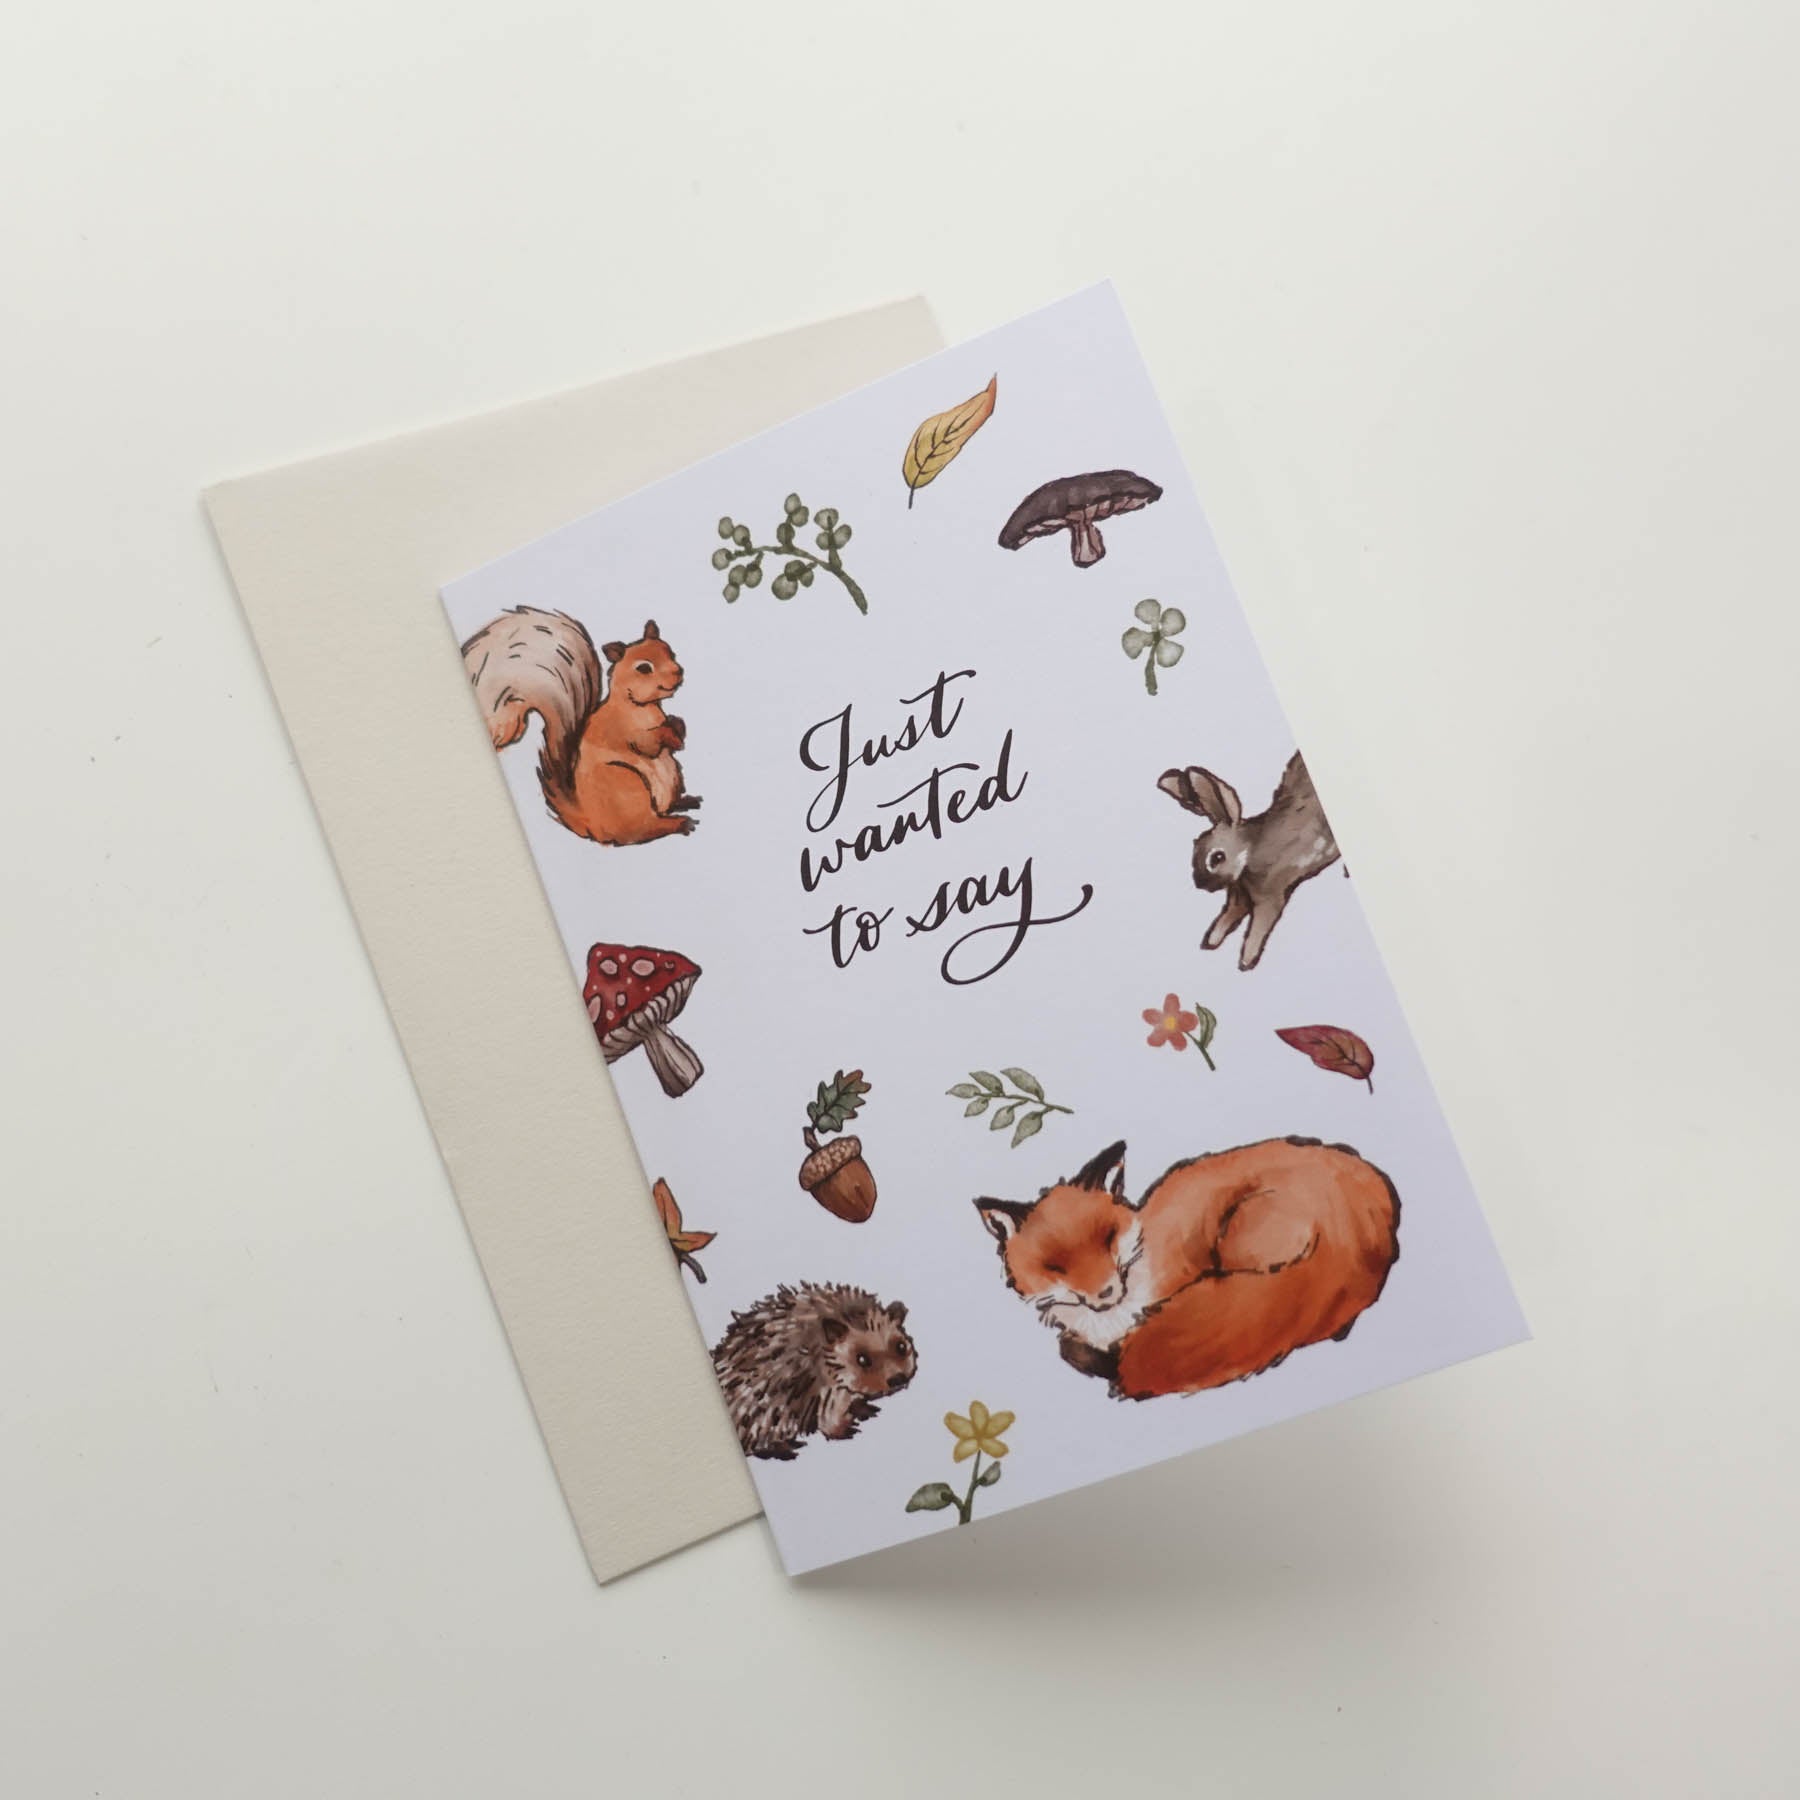 'Just wanted to say' Woodland Greeting Card